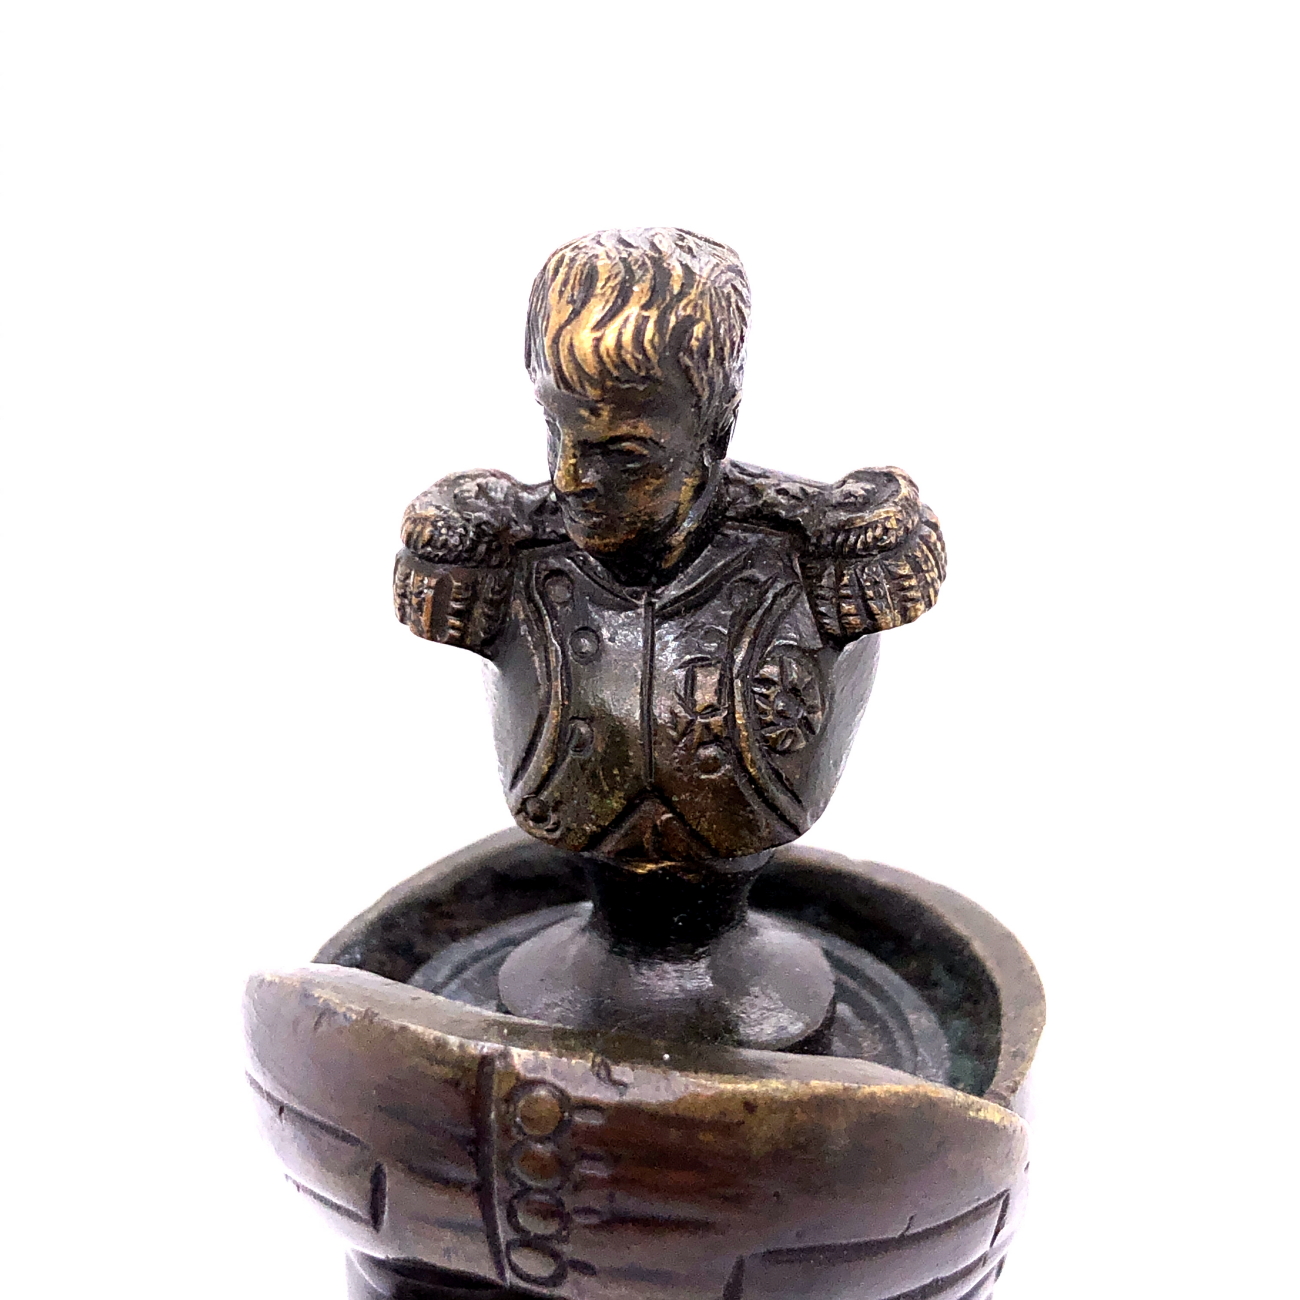 AN ANTIQUE PATINATED BRONZE FIGURE OF LOUIS XVIII " LE DESIRE" KING OF FRANCE. ON SQUARE PLINTH - Image 8 of 11